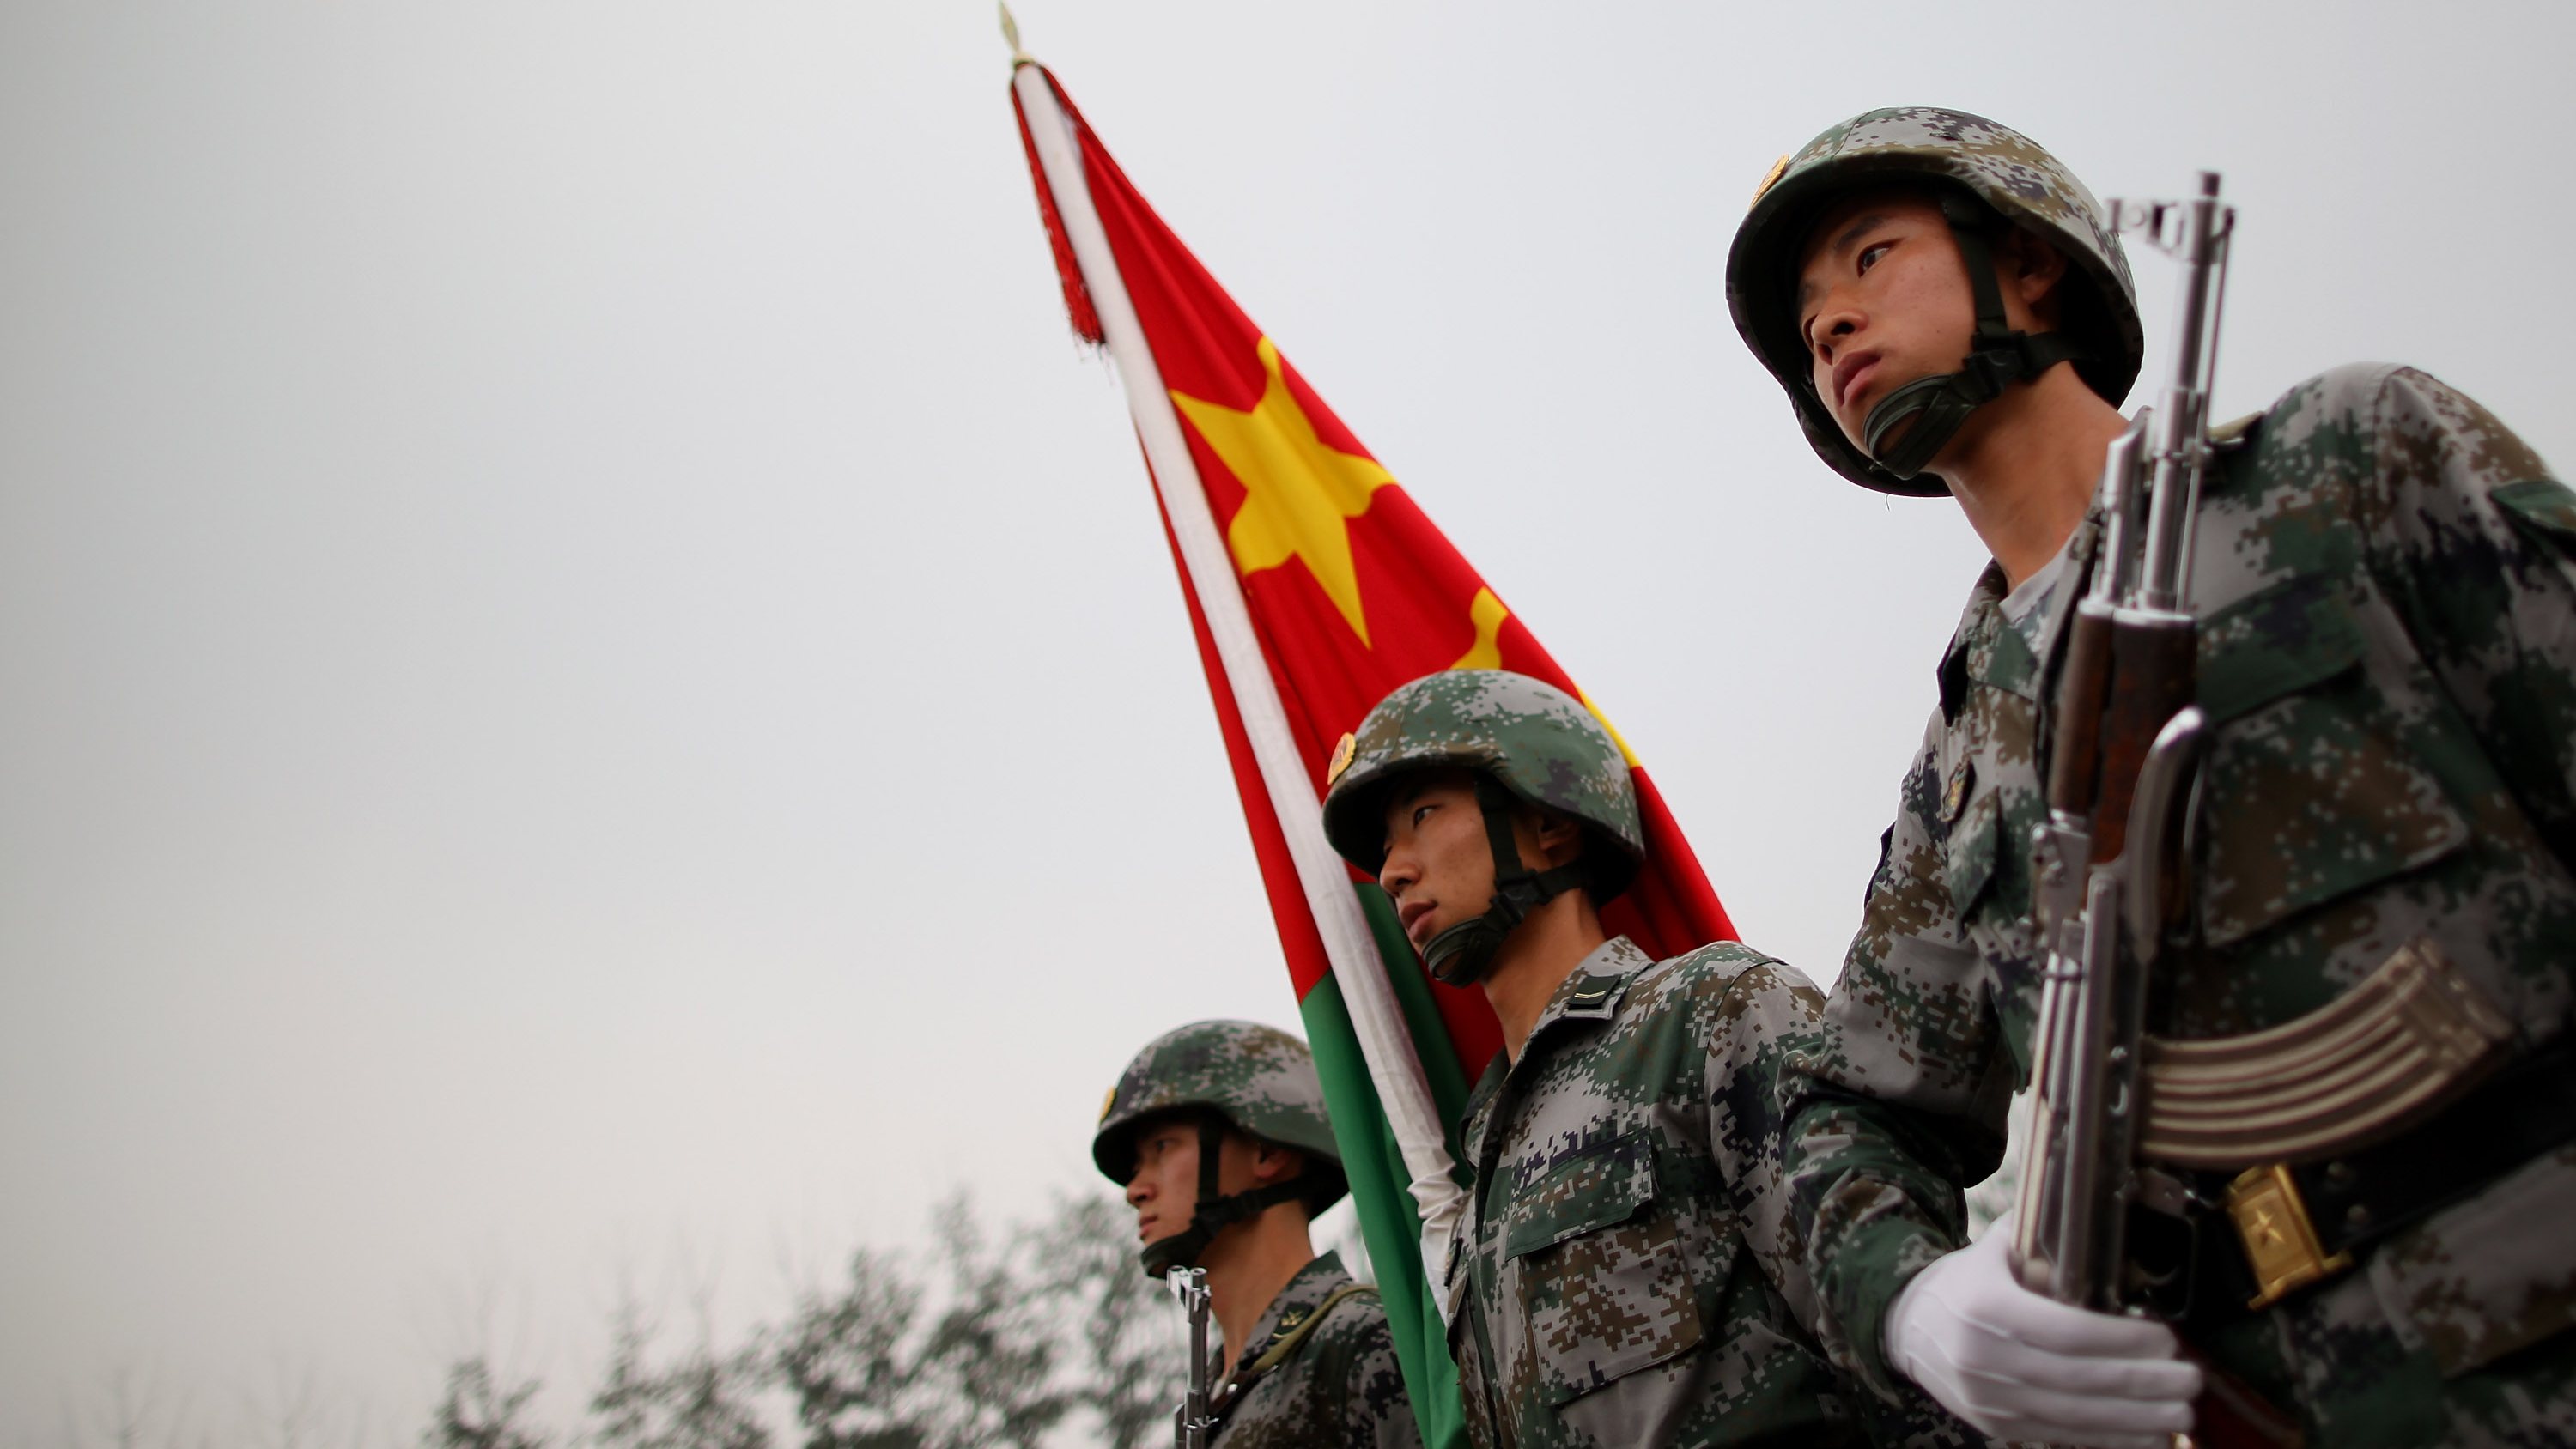 China Marks The 82nd Anniversary Of The Founding of PLA